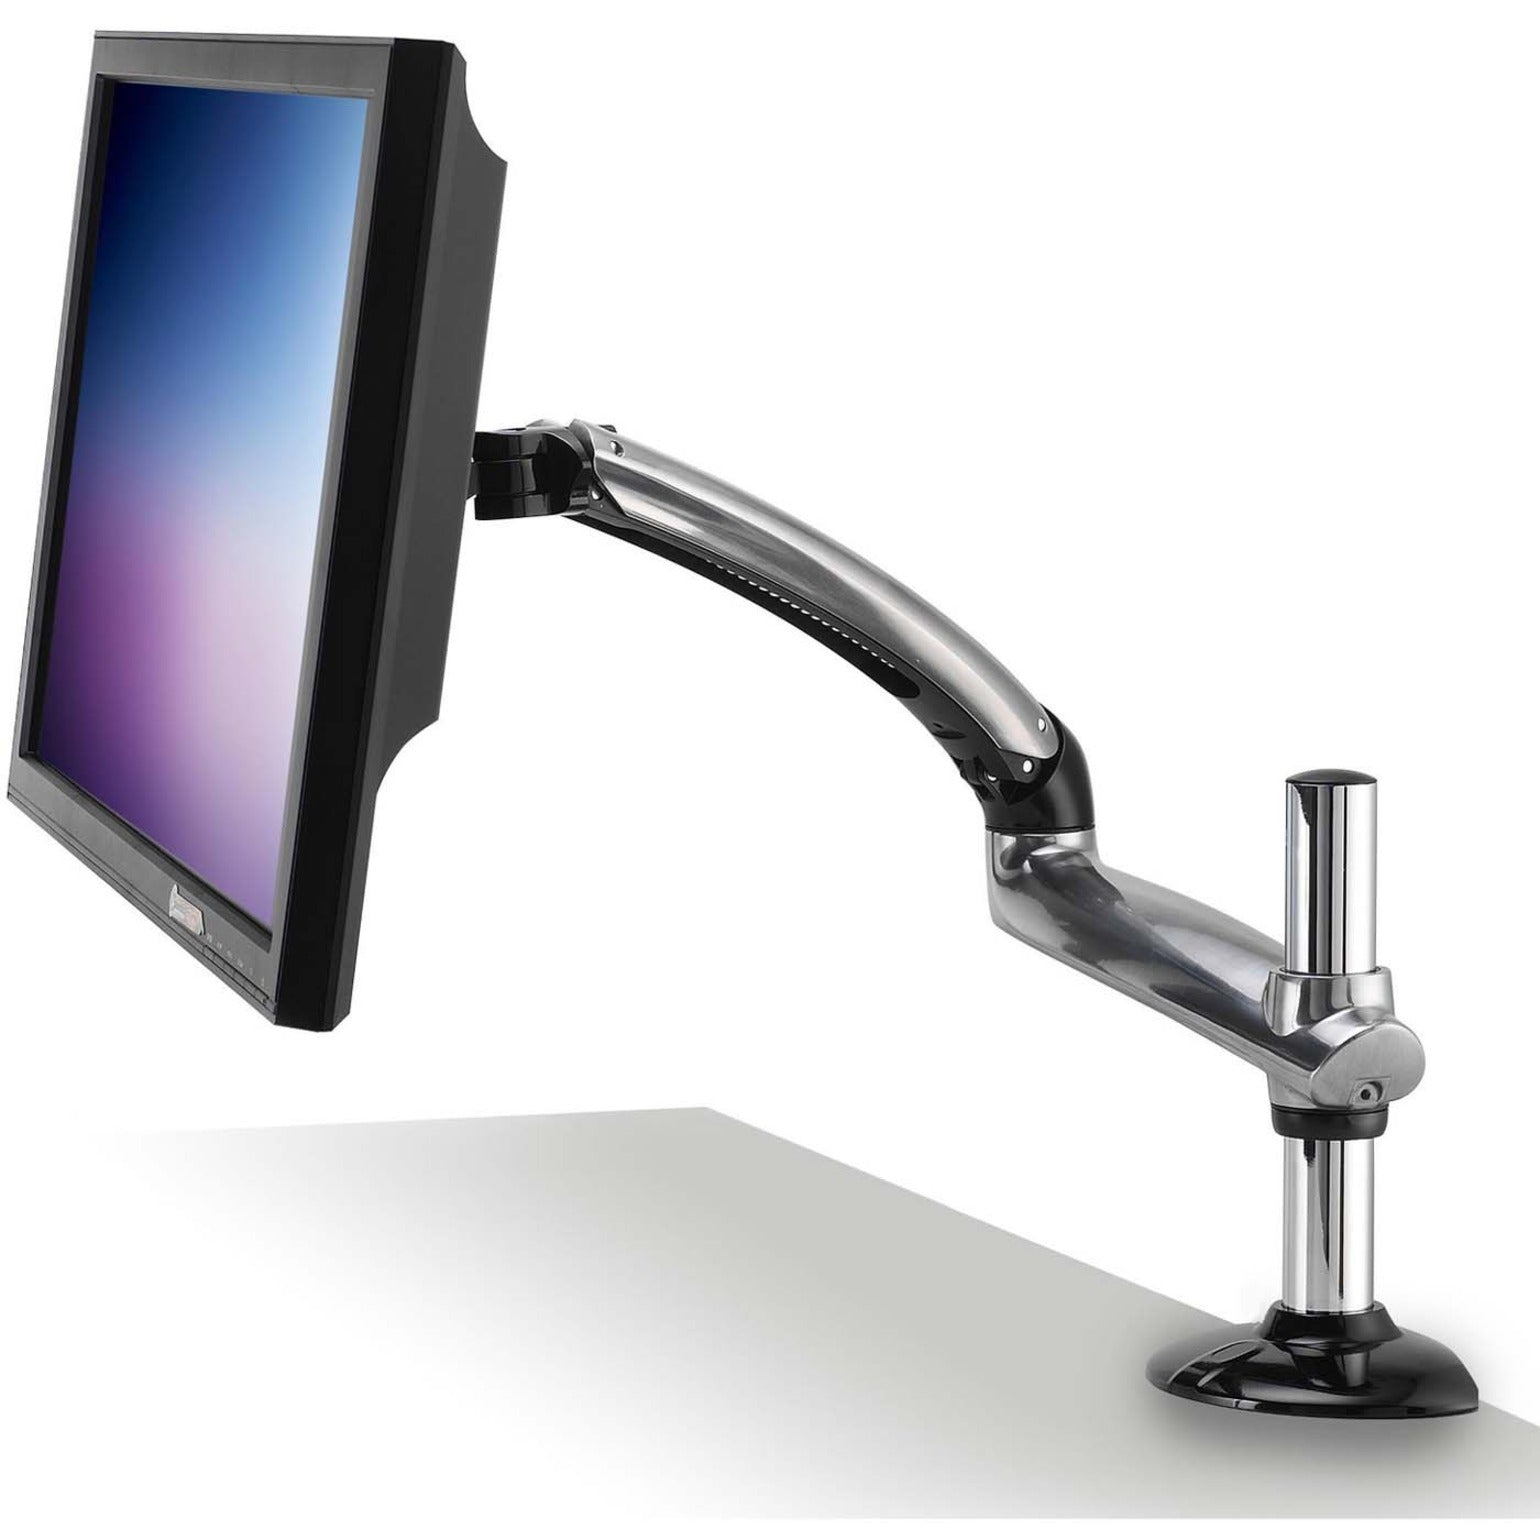 Ergotech FDM-PC-S01 Freedom Arm for PC, Full Motion Desk Mount with Height Adjustment, Tilt, Pan, and Rotation